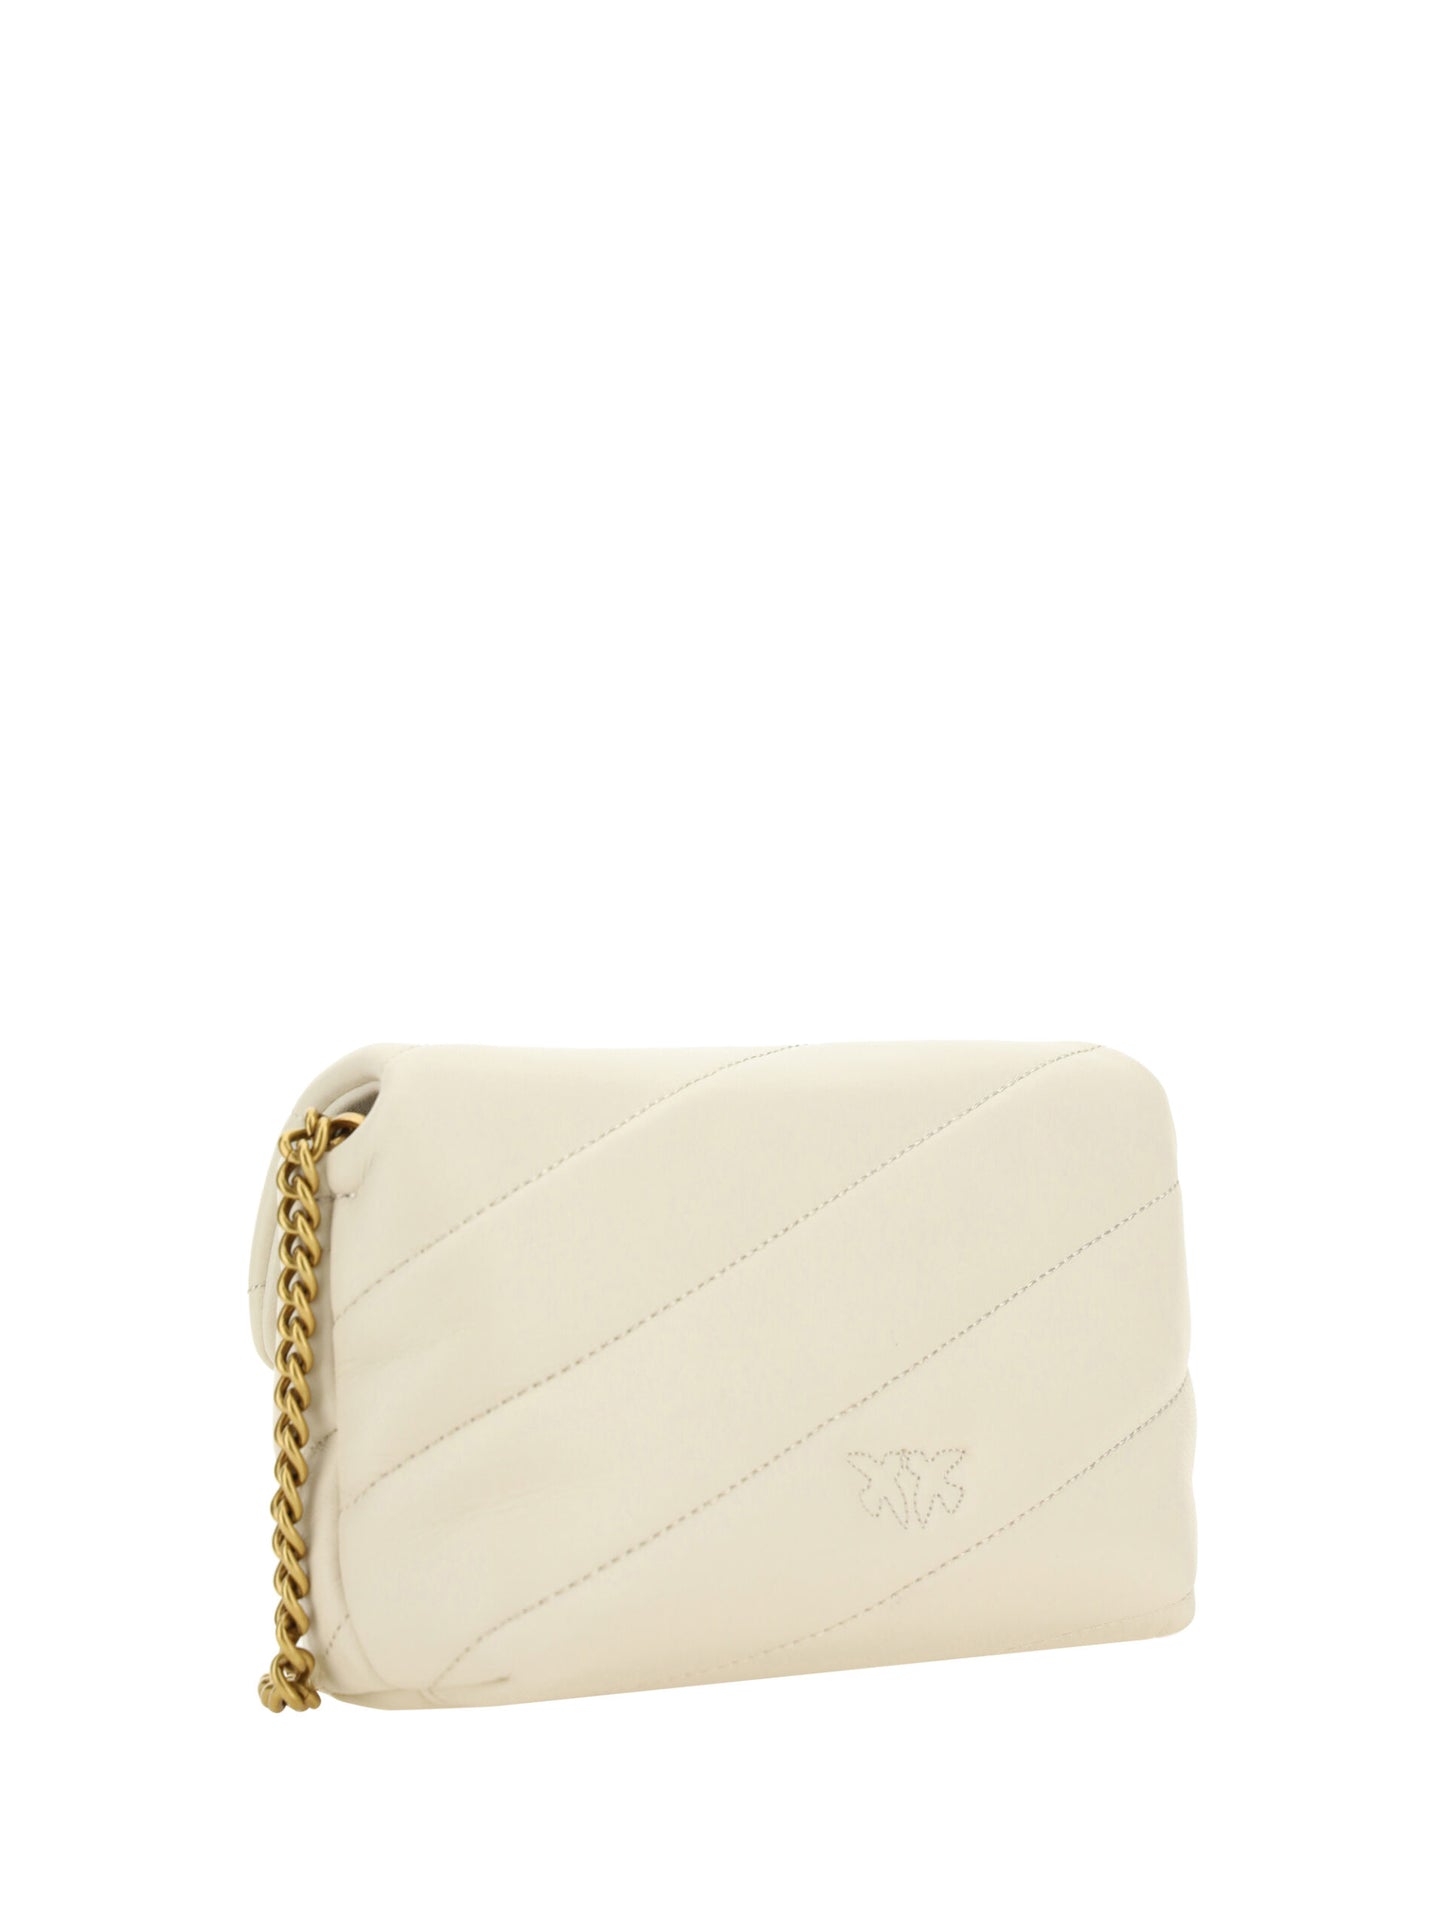 PINKO White Calf Leather Love Baby Small Shoulder Bag